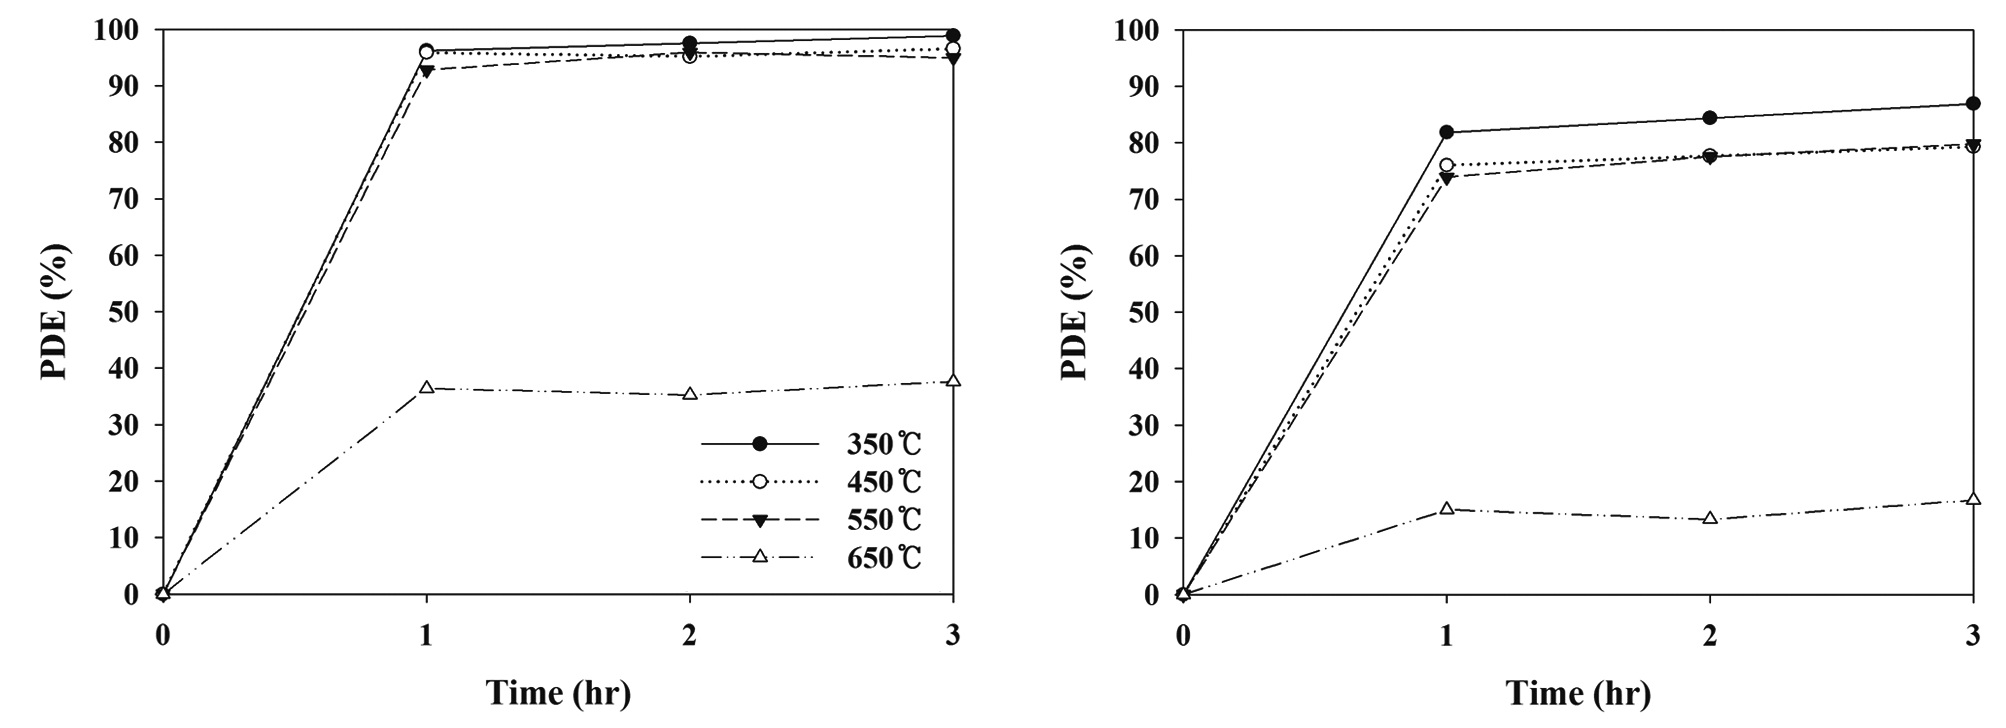 Photocatalytic degradation efficiency of (a) trichloroethylene and (b) perchloroethylene, as determined via a photocatalytic system with N-TiO2, according to calcinations temperature (350℃, 450℃, 550℃, and 650℃). N-TiO2: N-doped titanium dioxide, PDE: photocatalytic degradation efficiency.